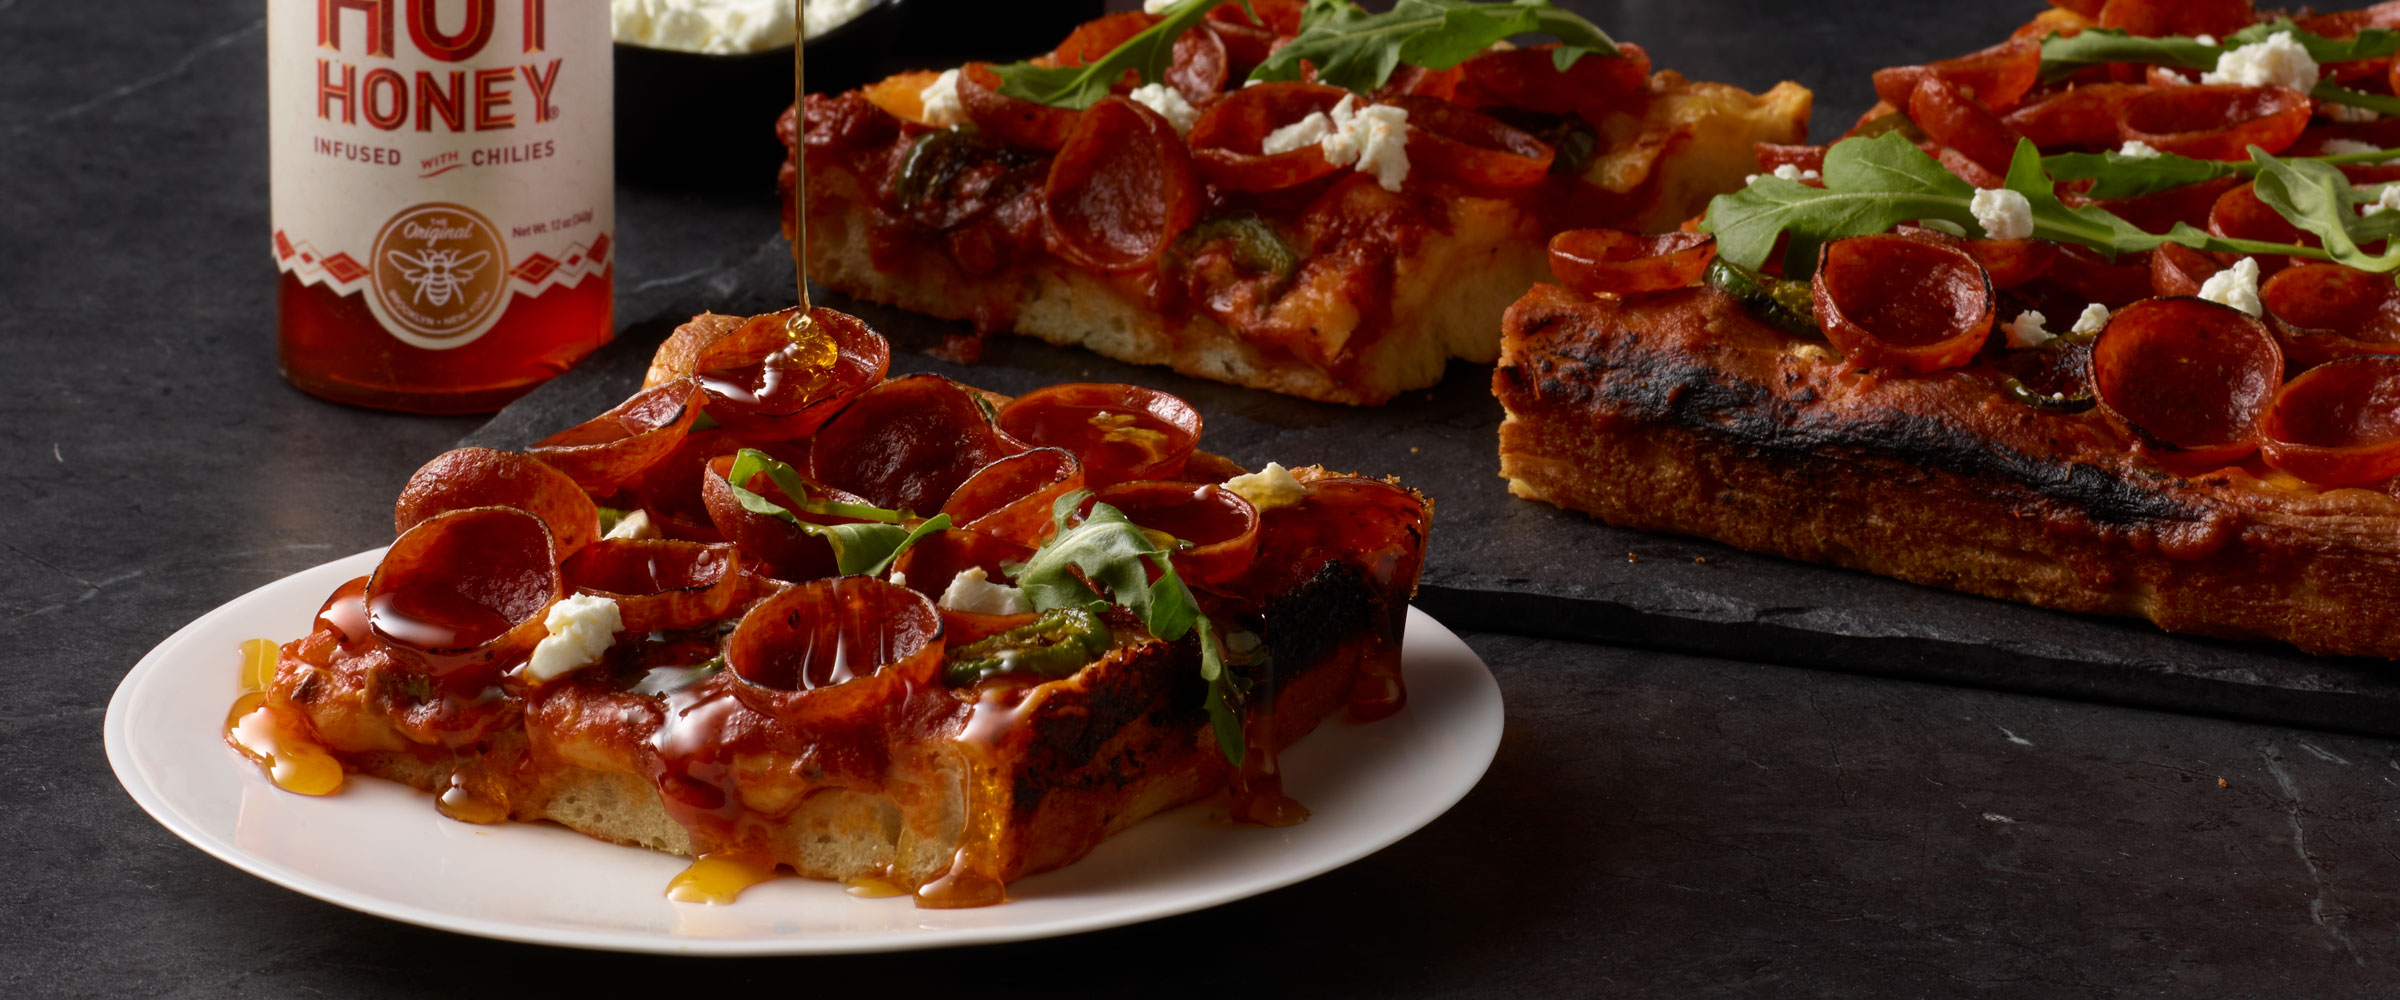 Cup N’ Crisp Pepperoni Detroit-Style Pizza drizzled with Hot Honey